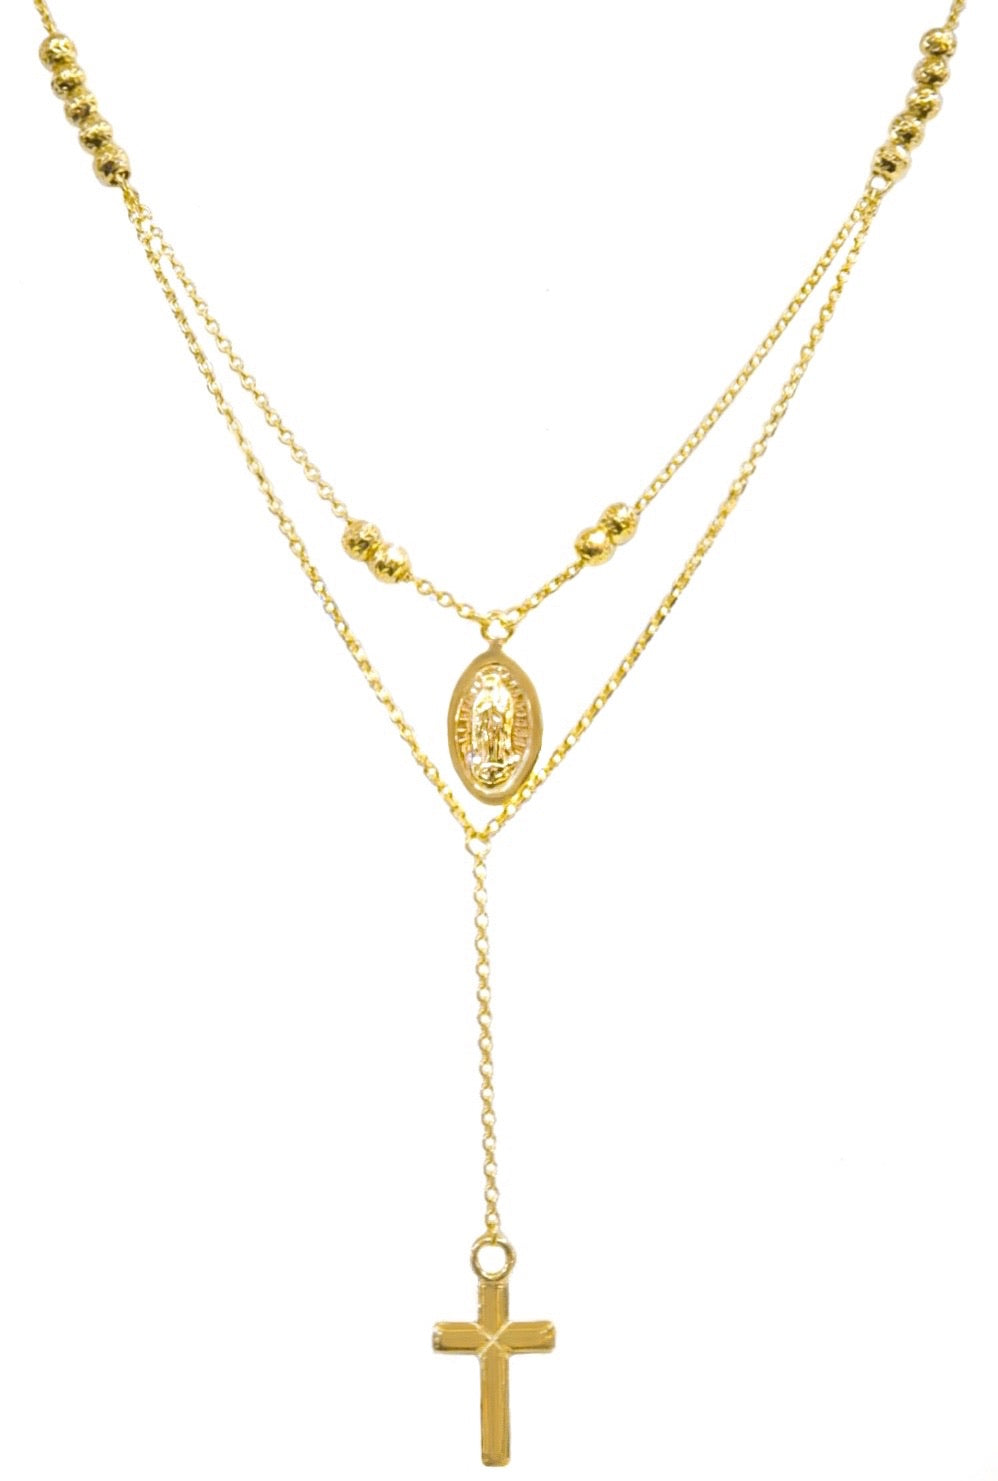 14K YELLOW GOLD LAYERED ROSARY NECKLACE